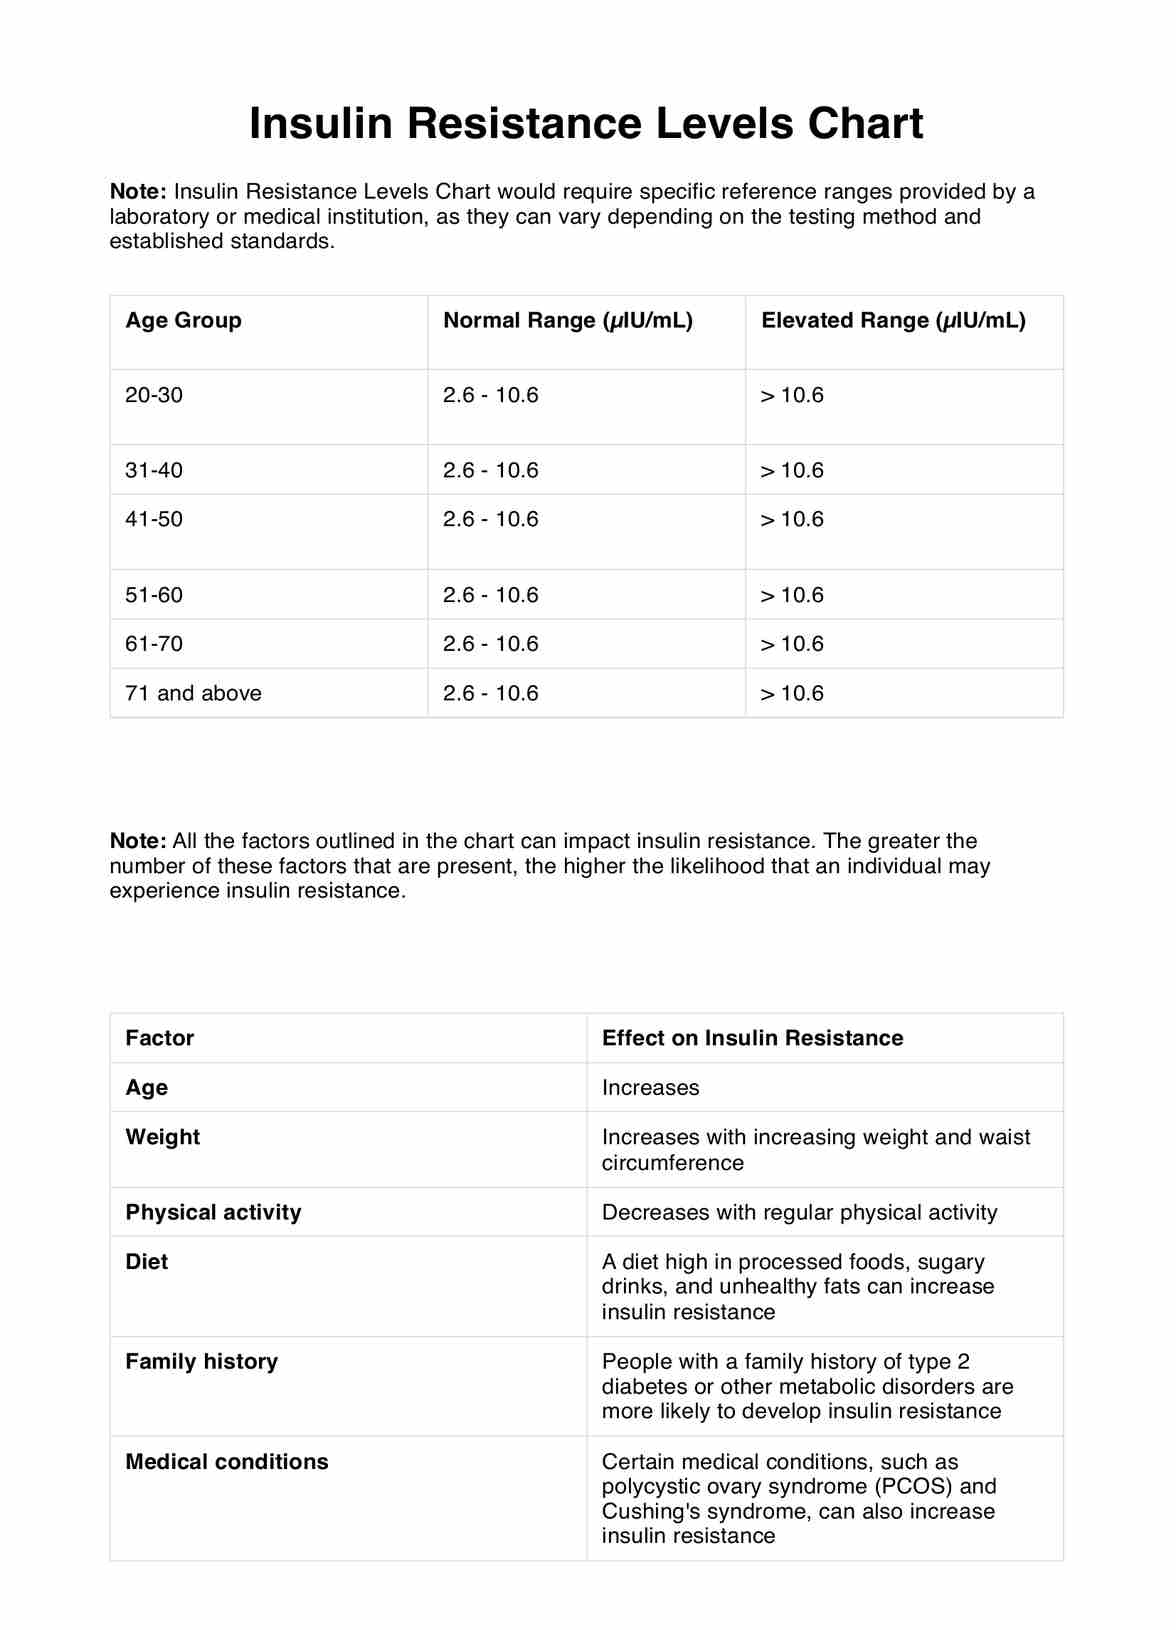 Insulin Resistance Levels PDF Example